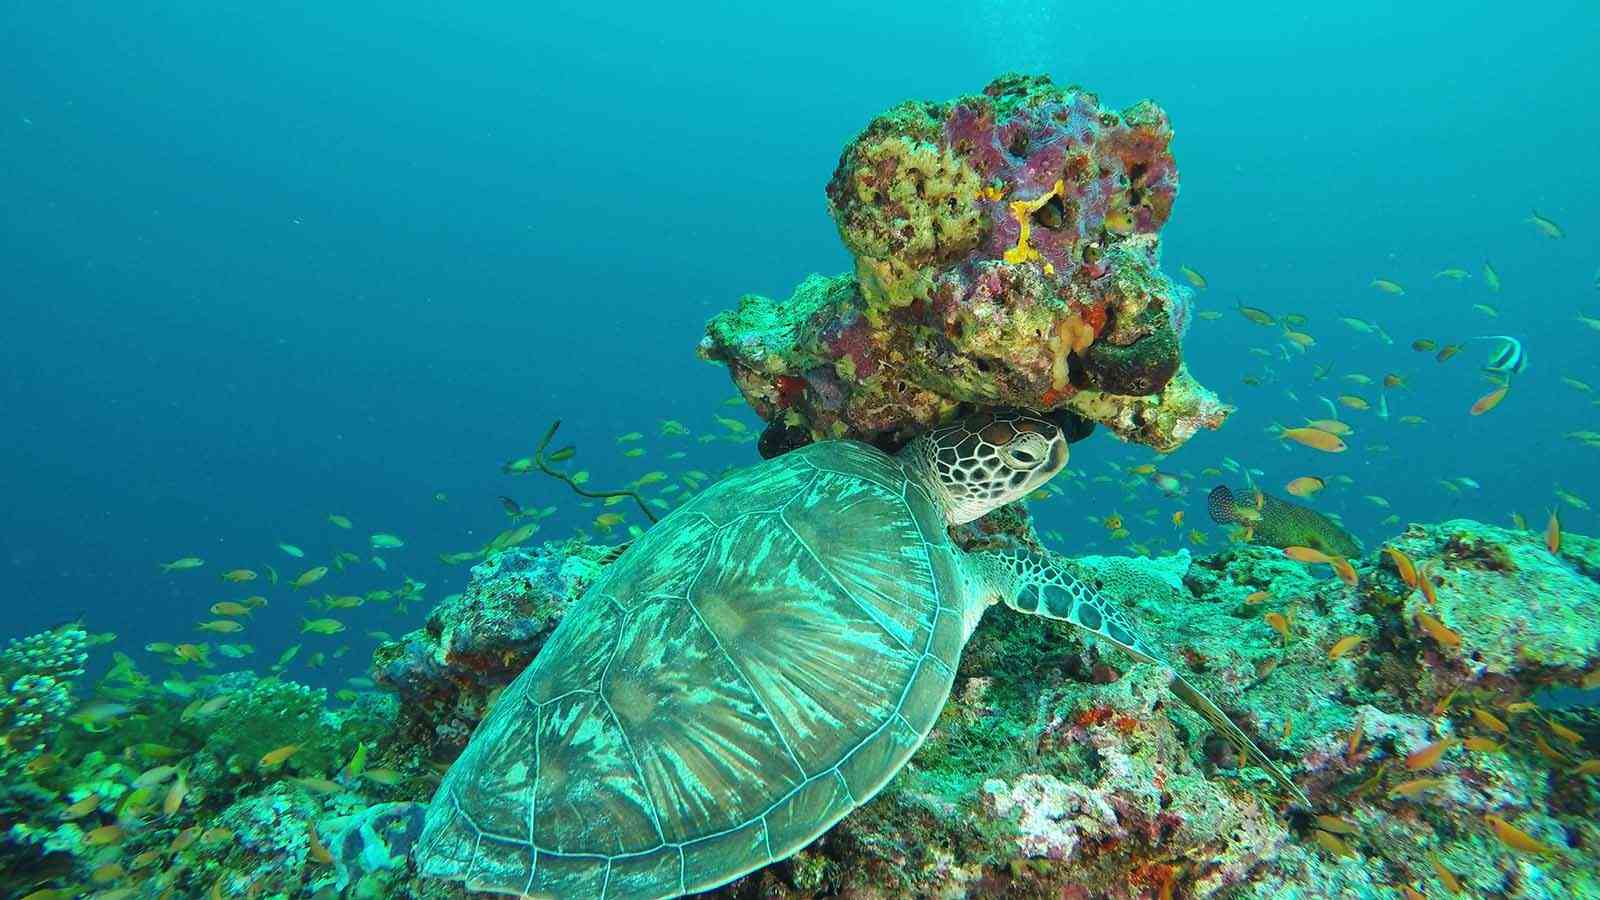 World Sea Turtle Day 2022: Date, History and Facts about Sea Turtles